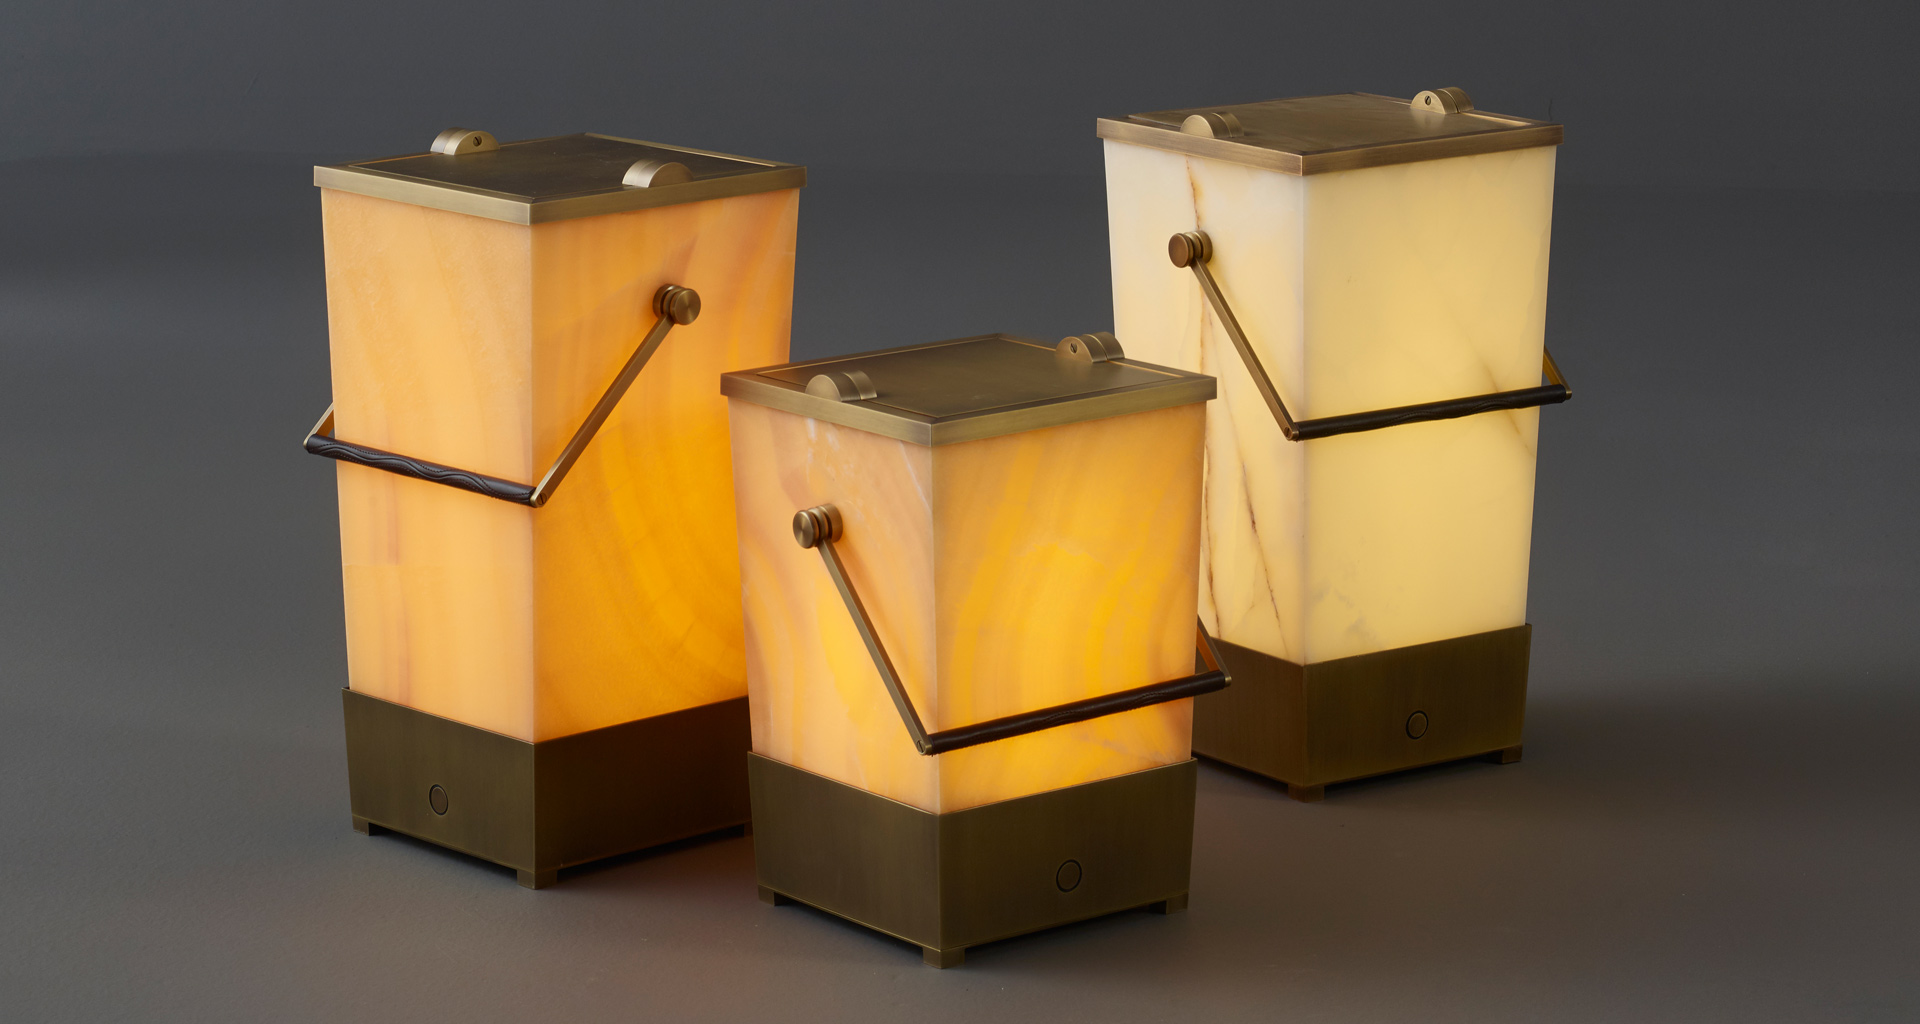 Hara is a floor wireless LED lamp shaped like a bucket with a bronze handle covered in leather, from Promemoria | Promemoria